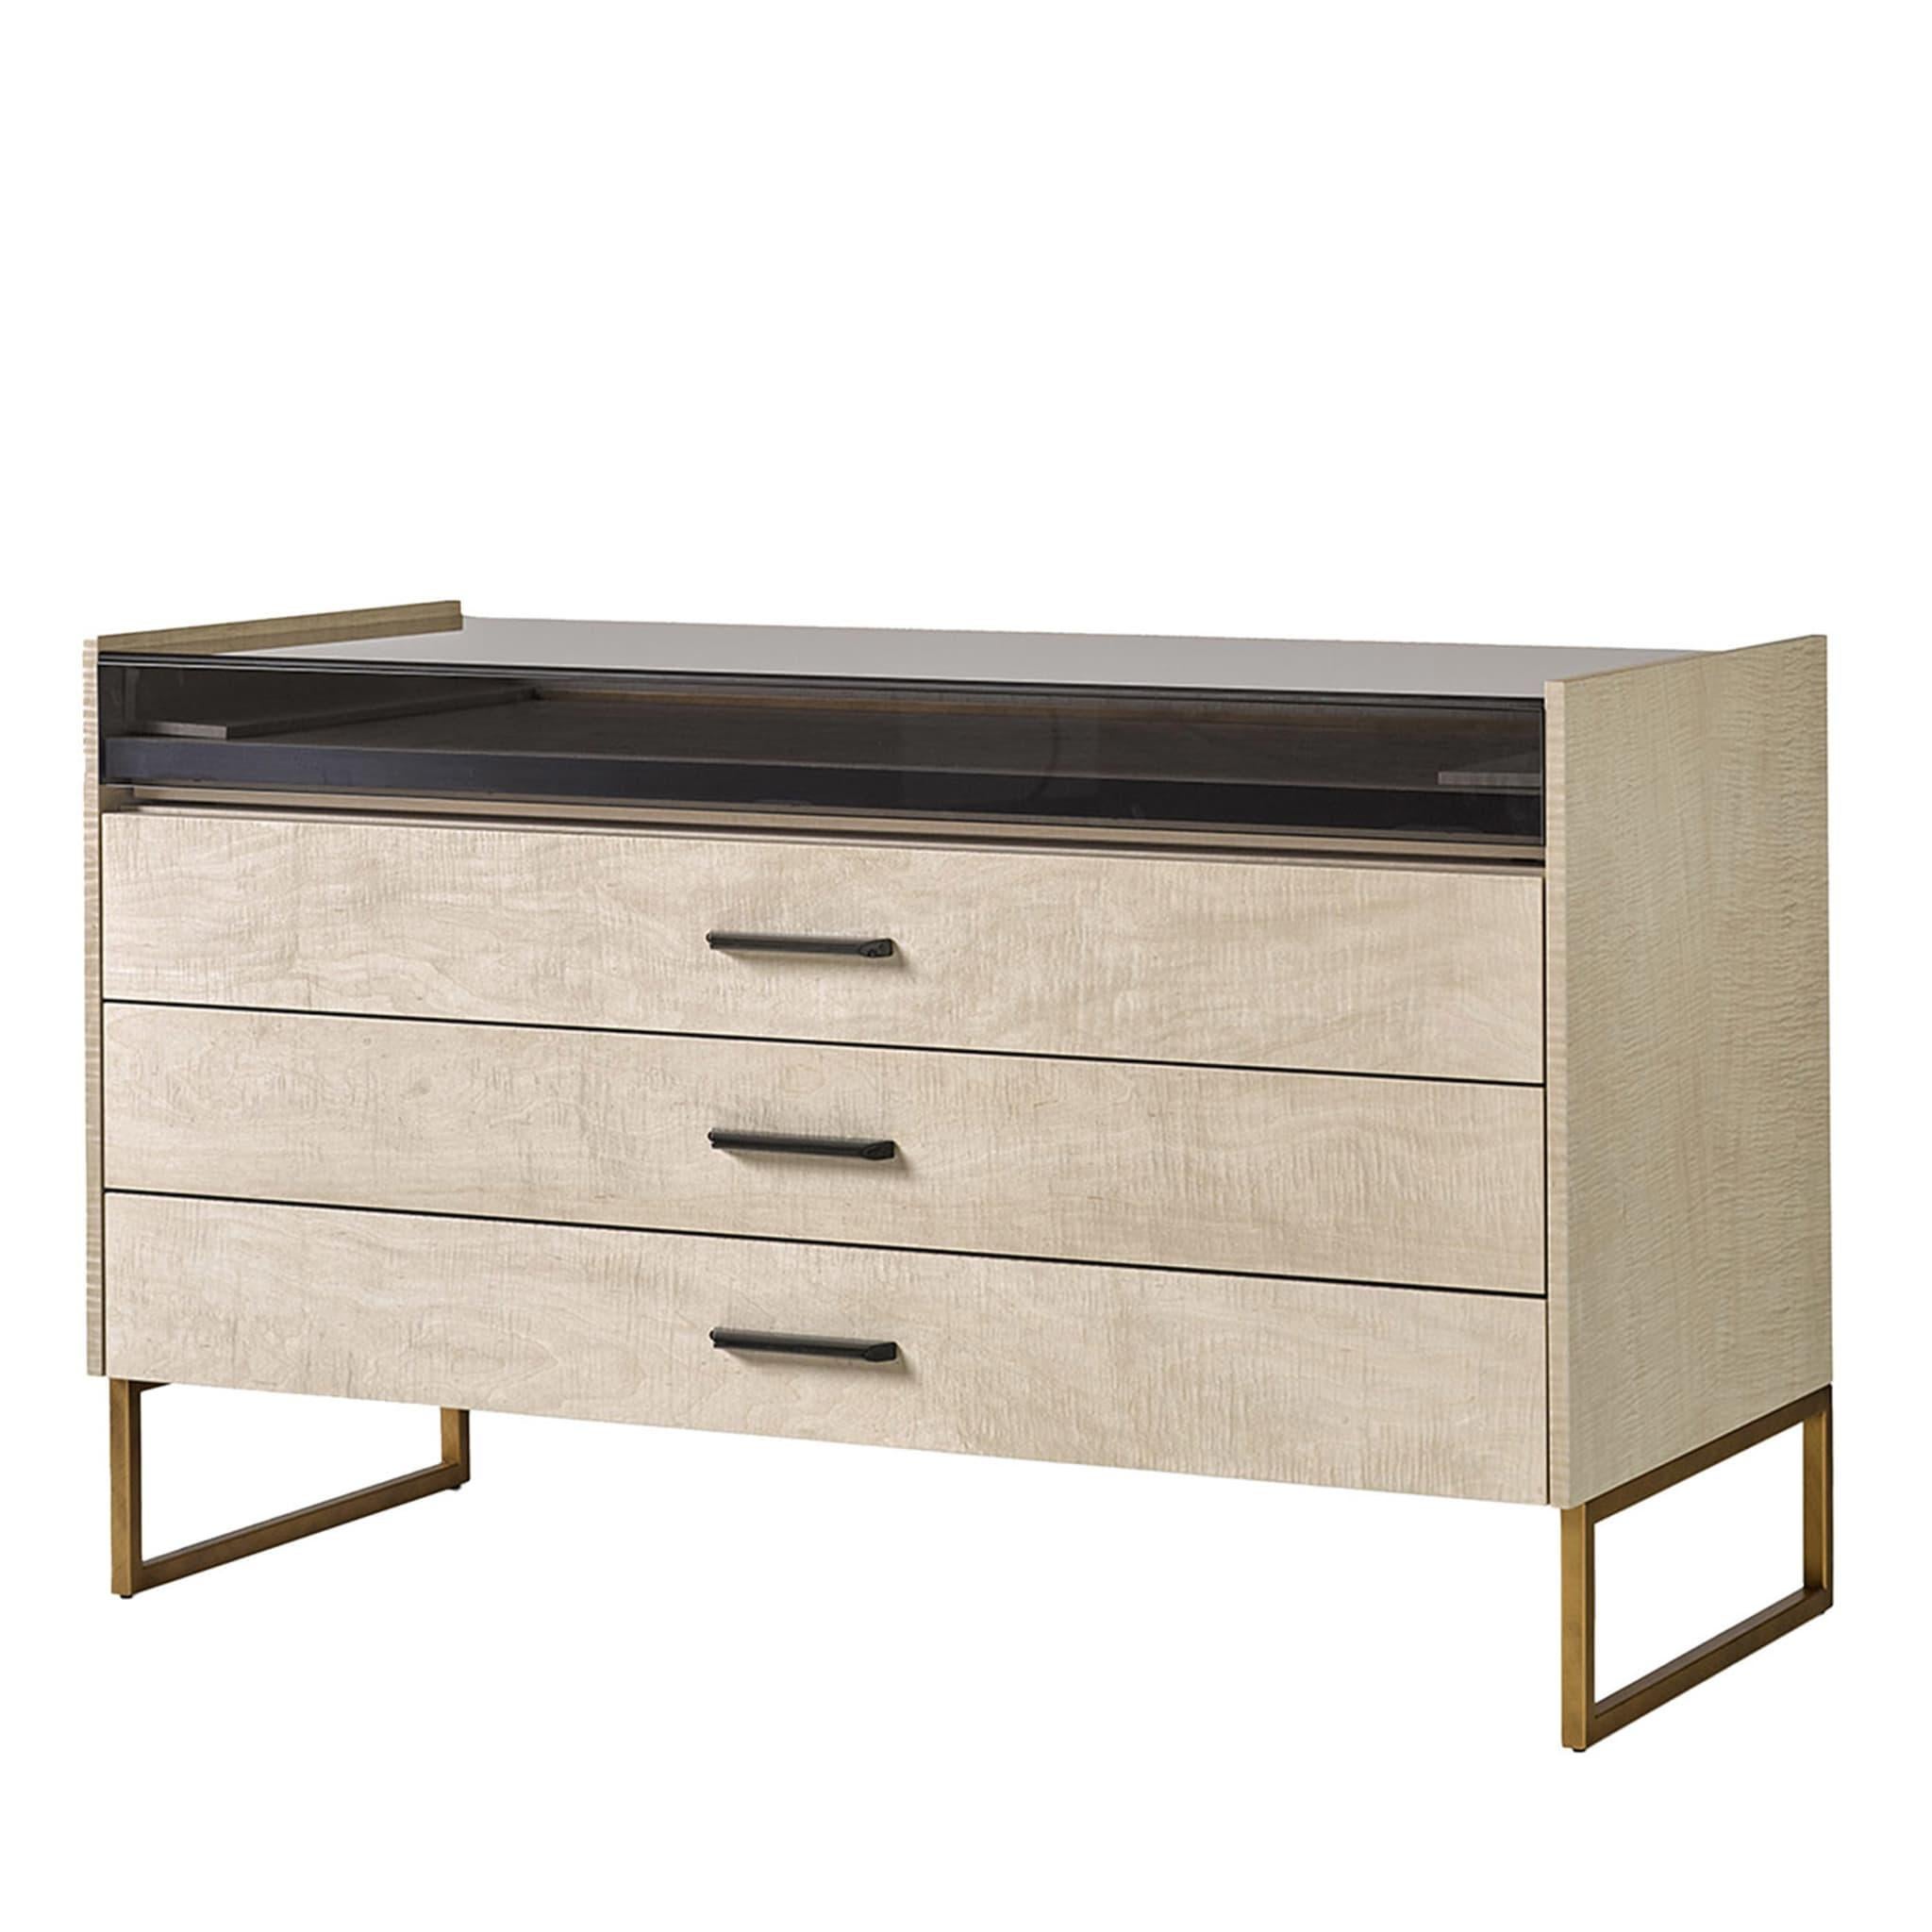 Dresser composed of three drawers and upper glass case with removable leather drawer. Particular finish in veneered wood that creates a 'wavy silk' effect thanks to this type of natural grain. Made up of metal legs, wooden handle, and leather top.